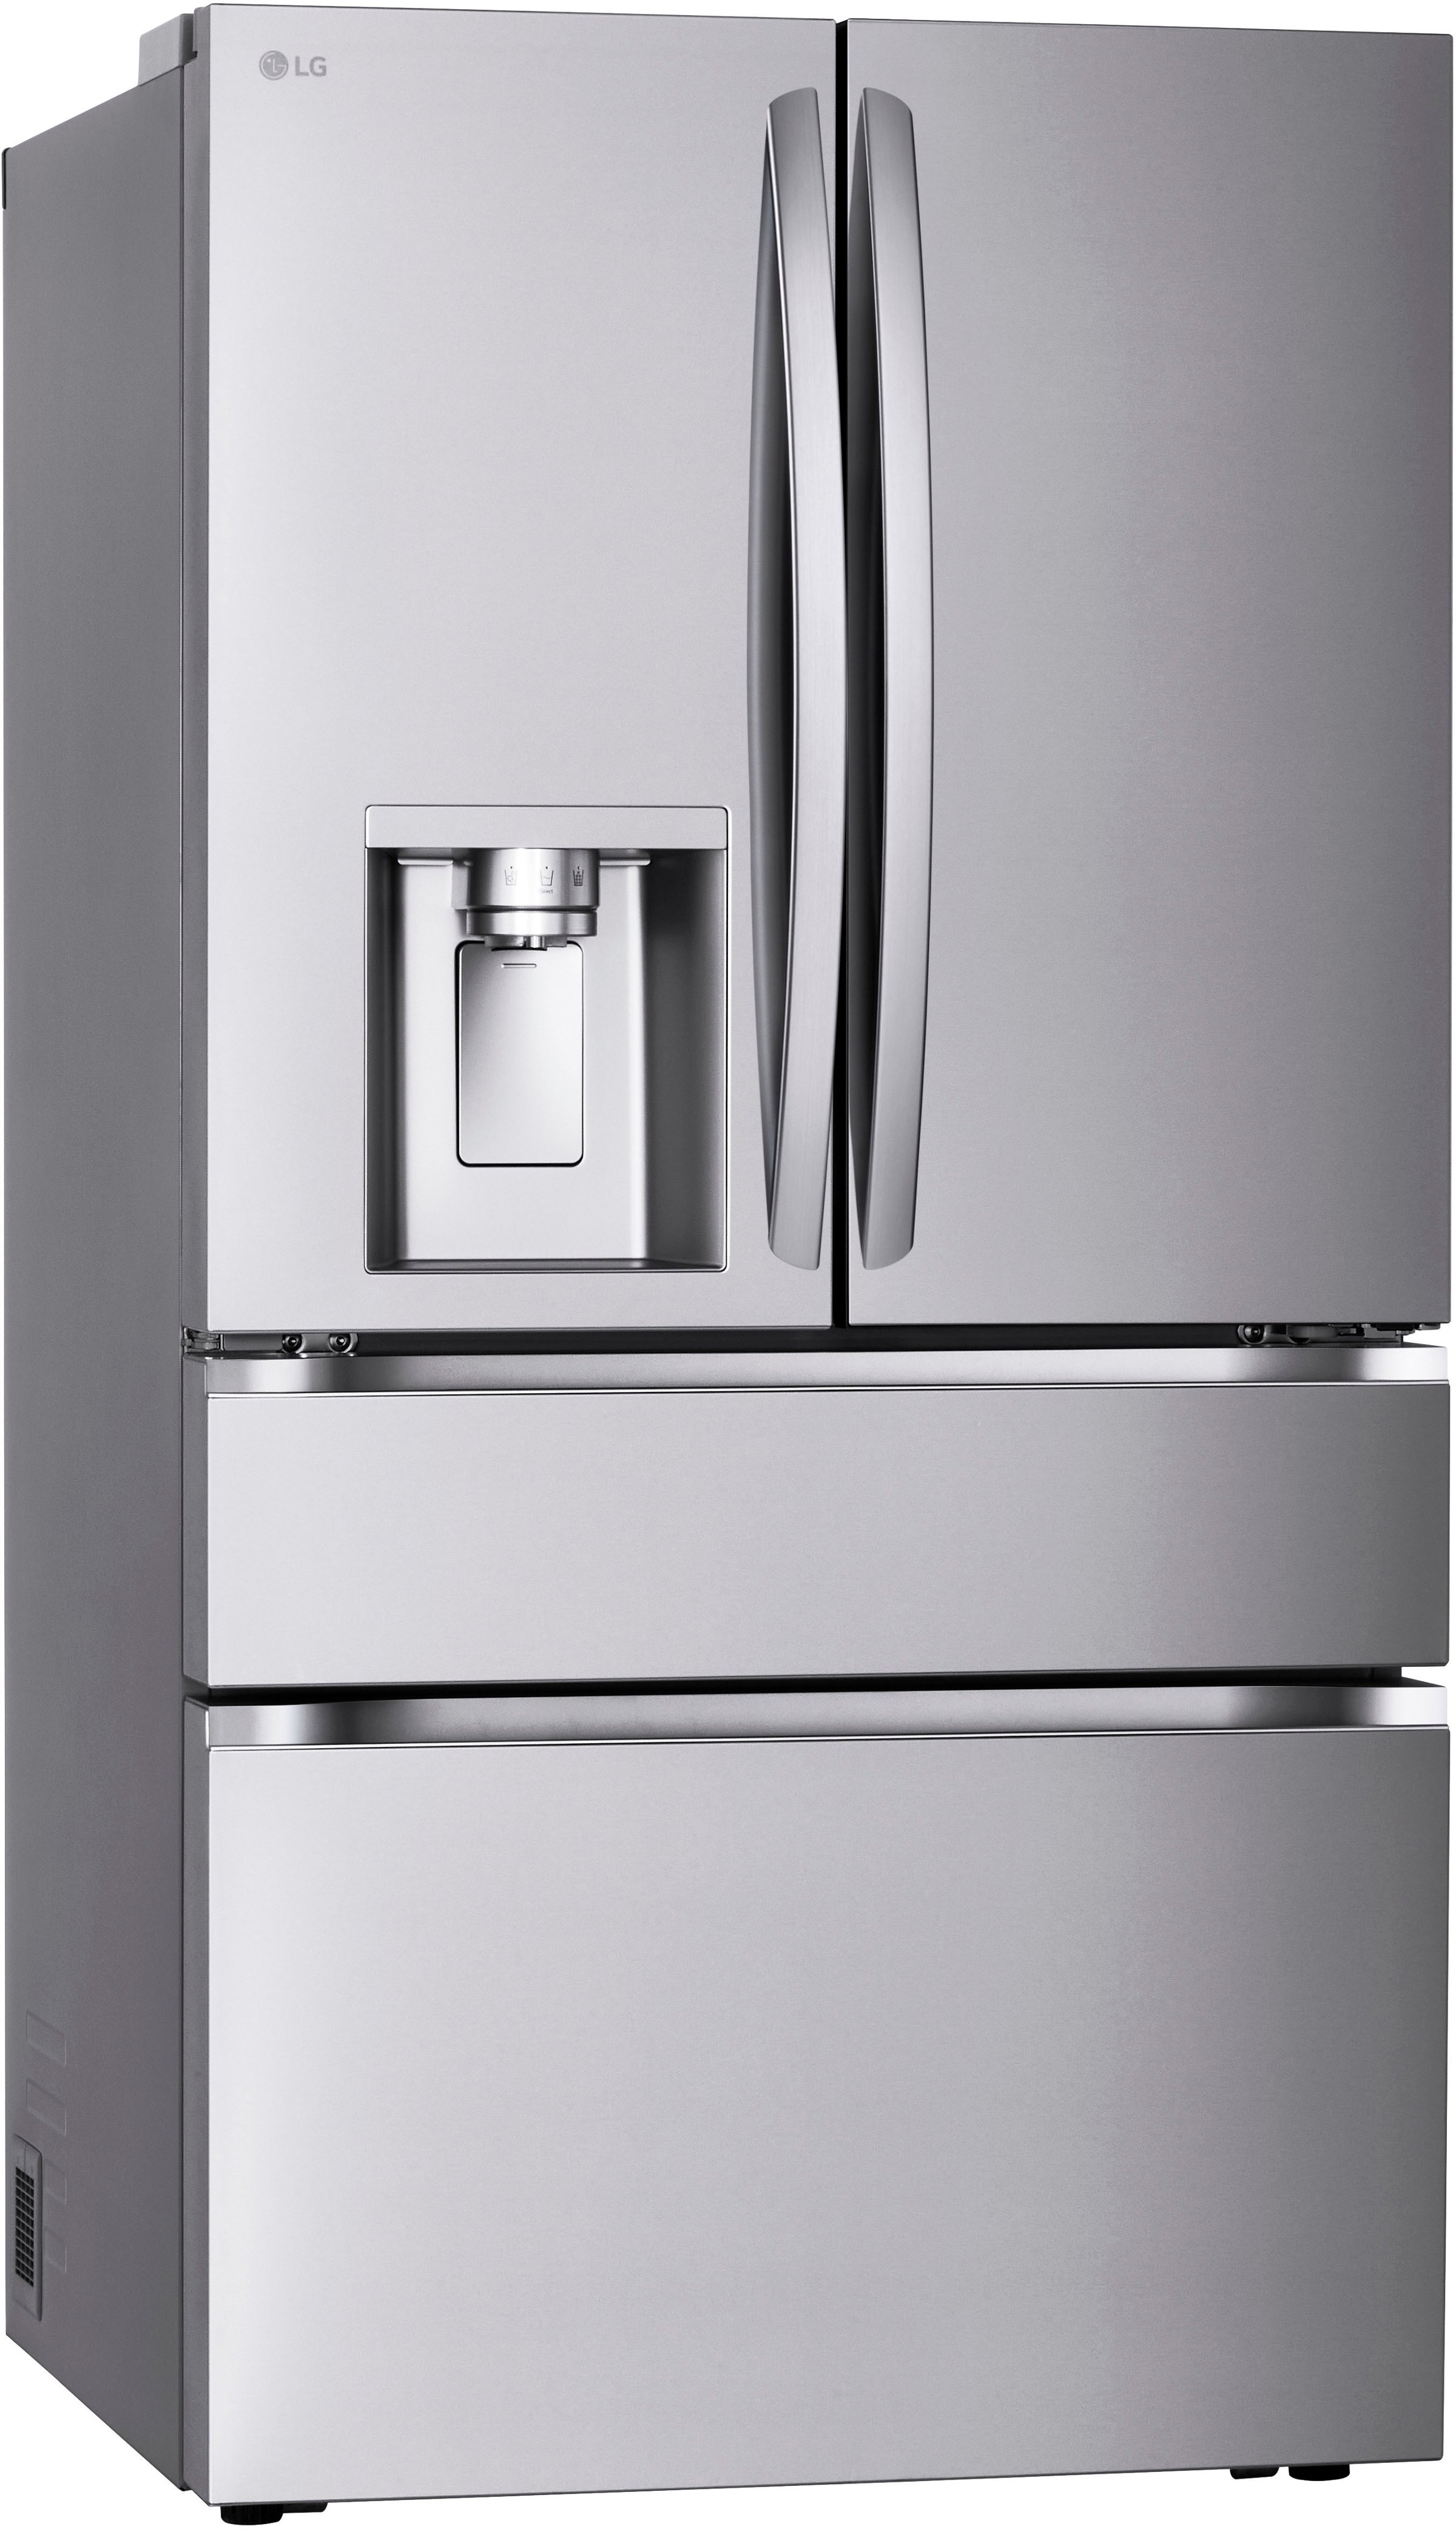 Angle View: LG - 28.6 Cu. Ft. French Door Smart Refrigerator with Full-Convert Drawer - Stainless Steel